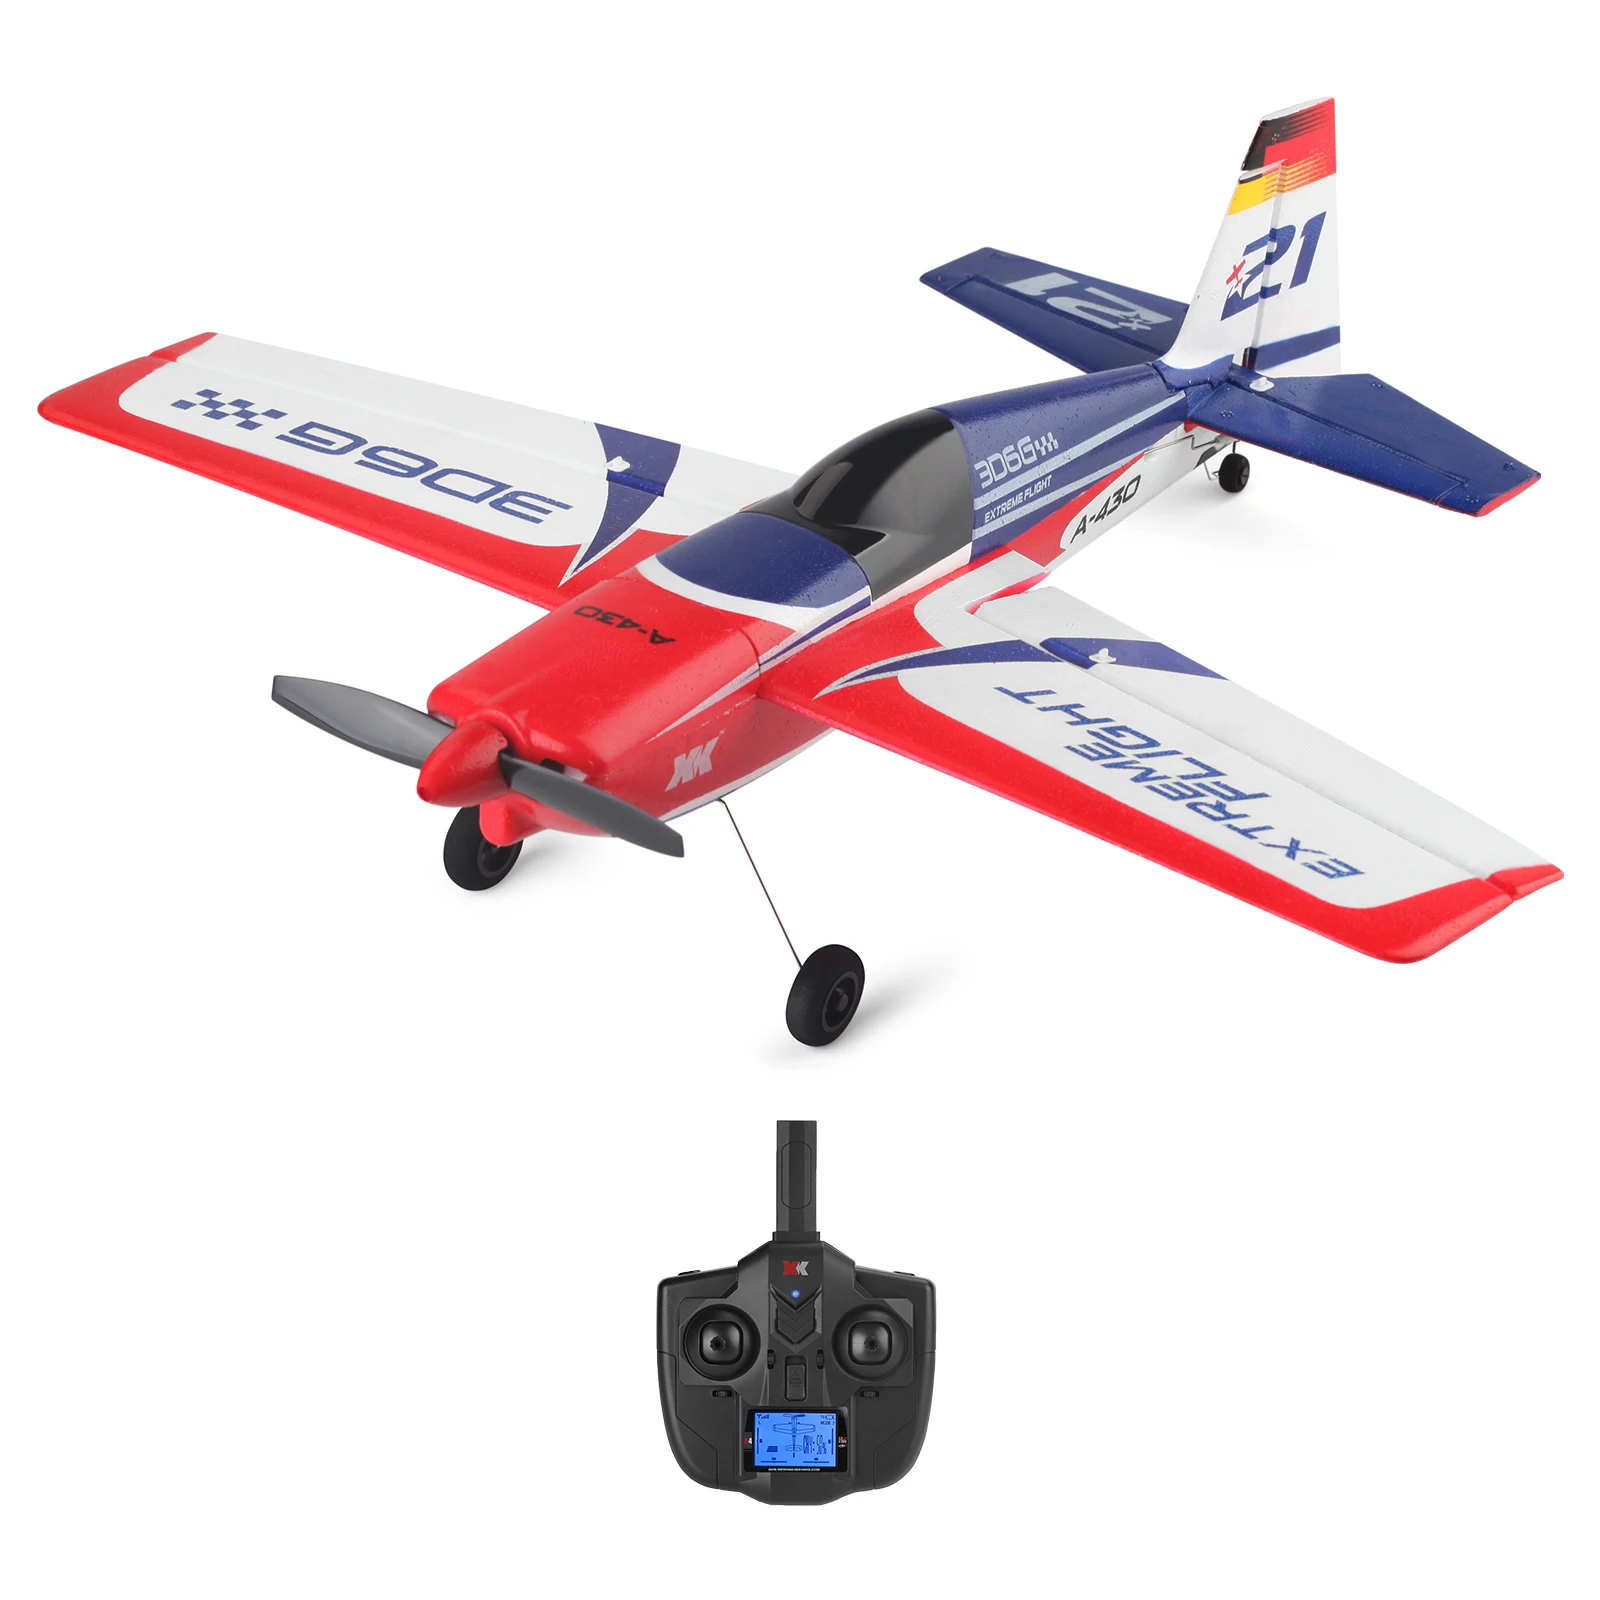 WLtoys XK A430 RC Plane 3D Modes 5CH Brushless Motor Easy to Fly Electric Remote Control Aircraft Toys